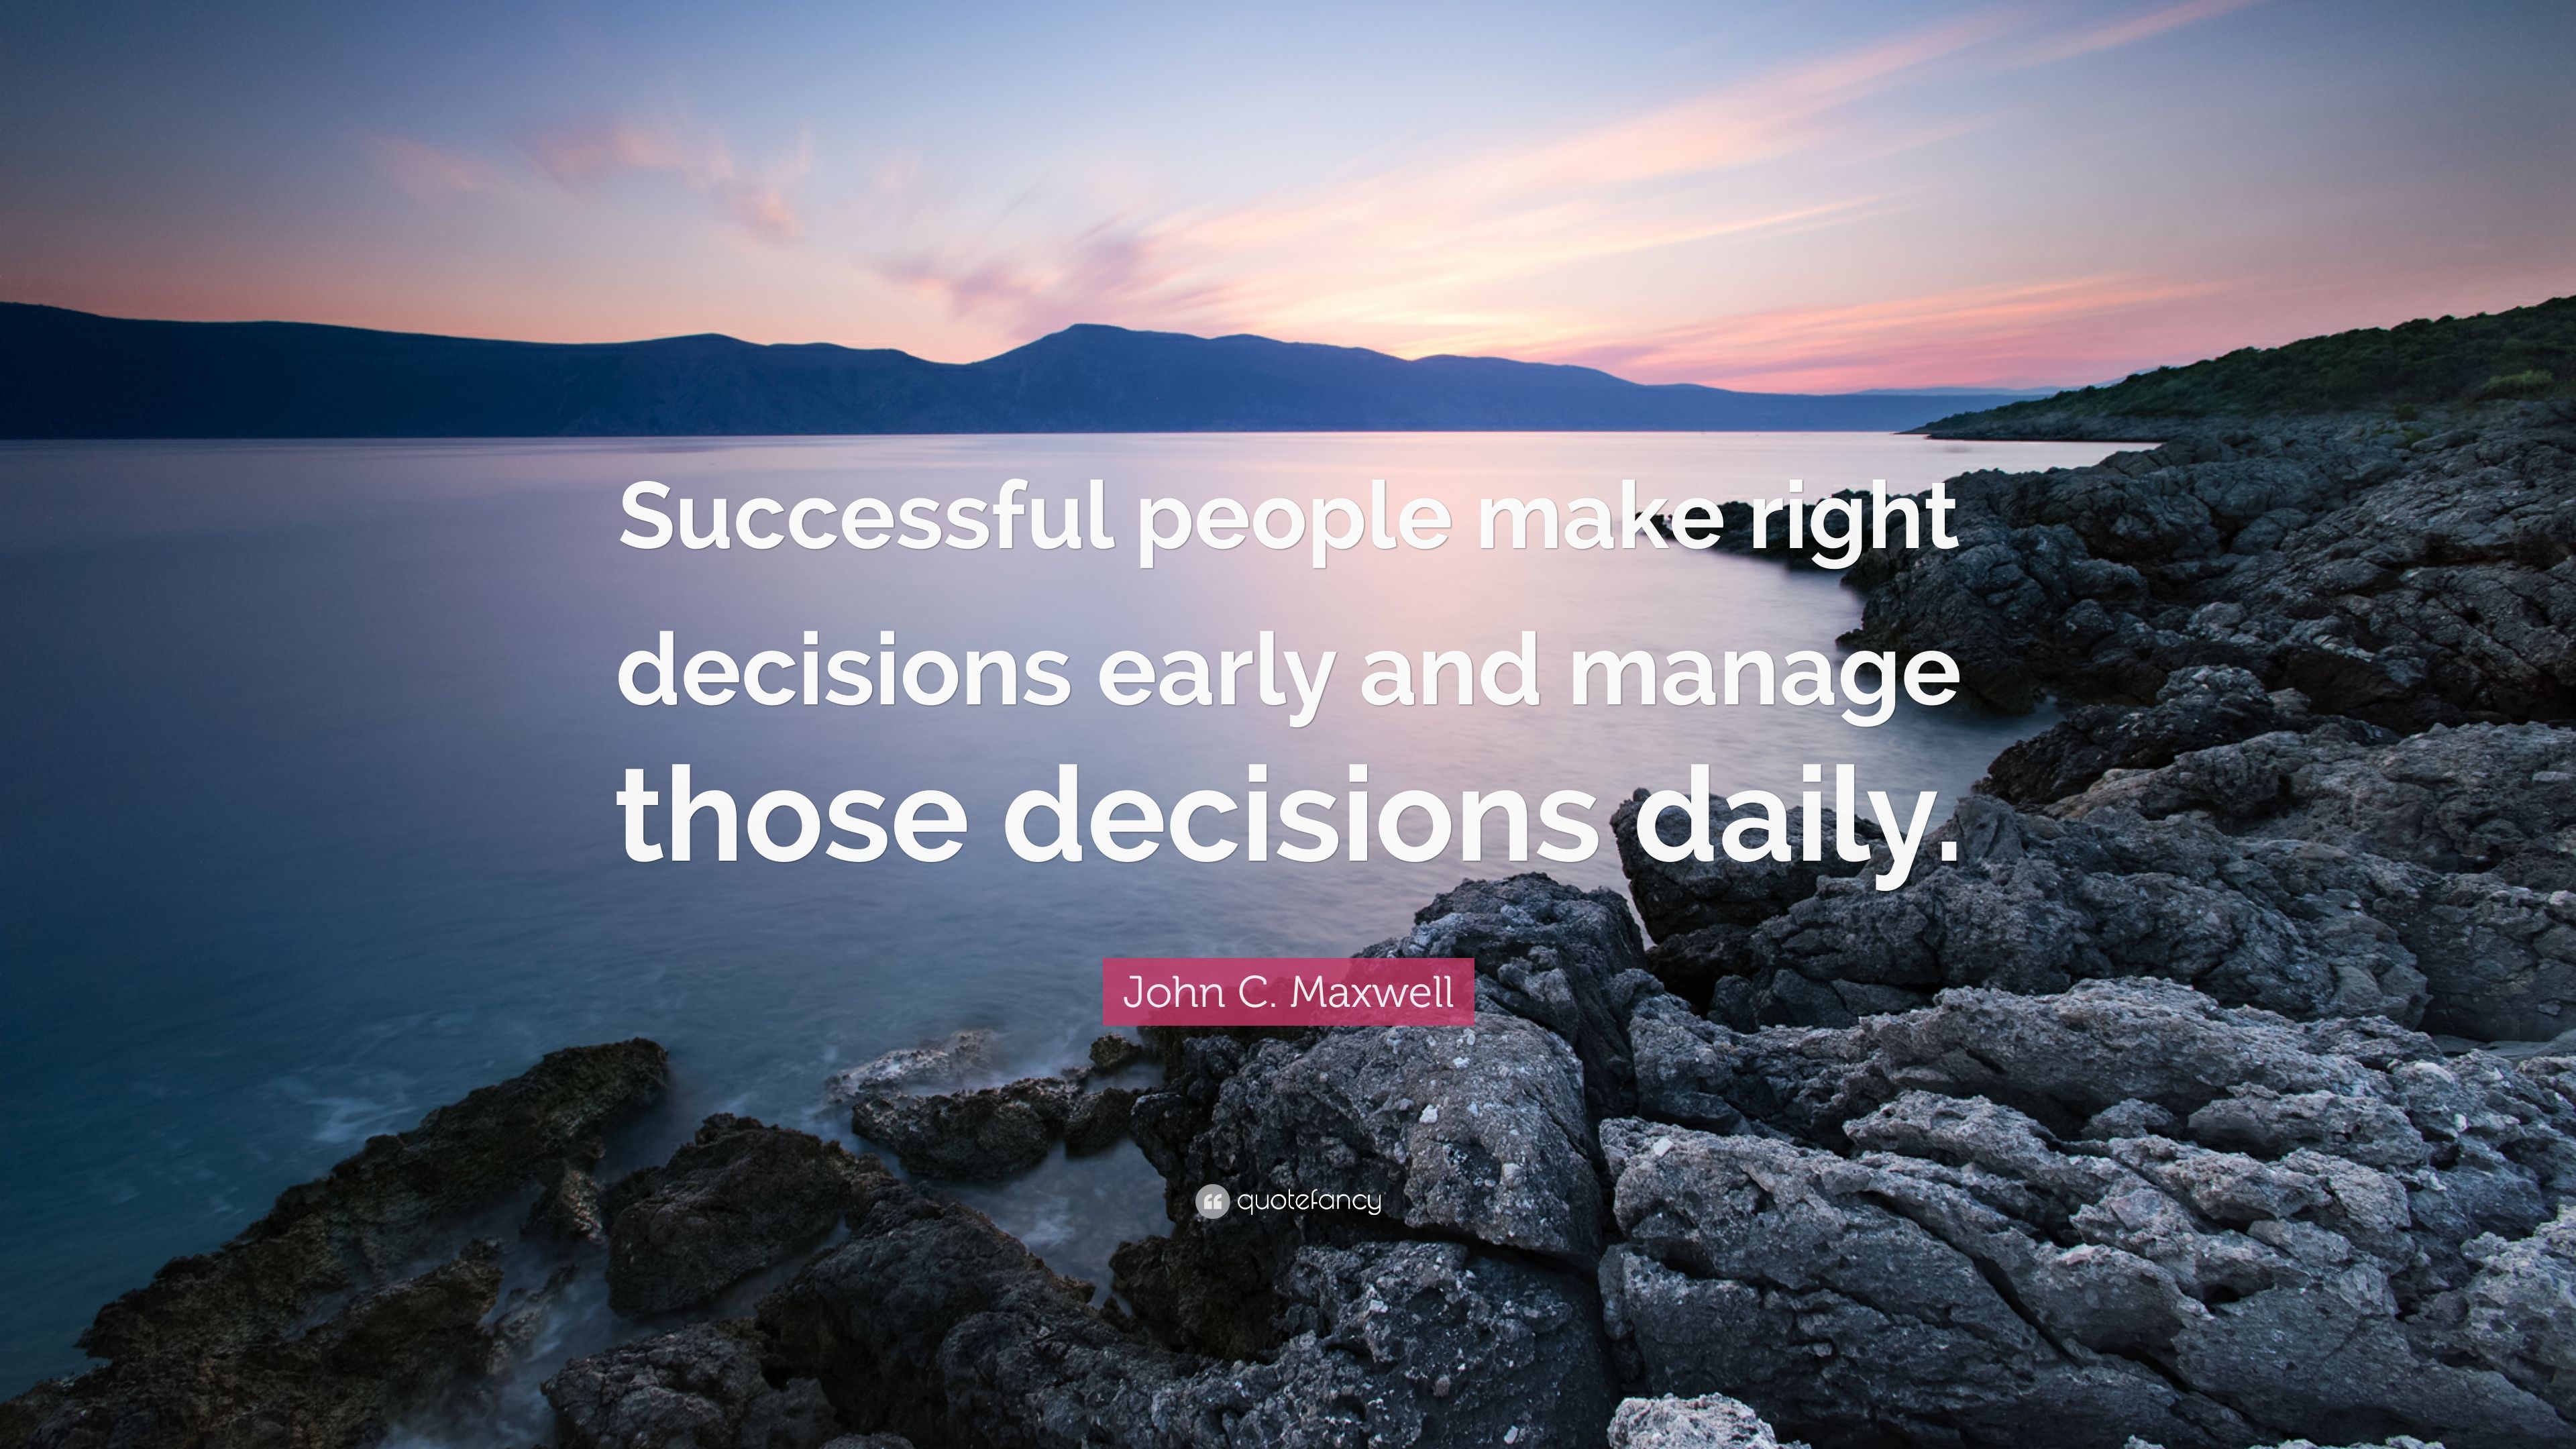 John C. Maxwell Quote: “Successful people make right decisions early and manage those decisions daily.” (10 wallpaper)